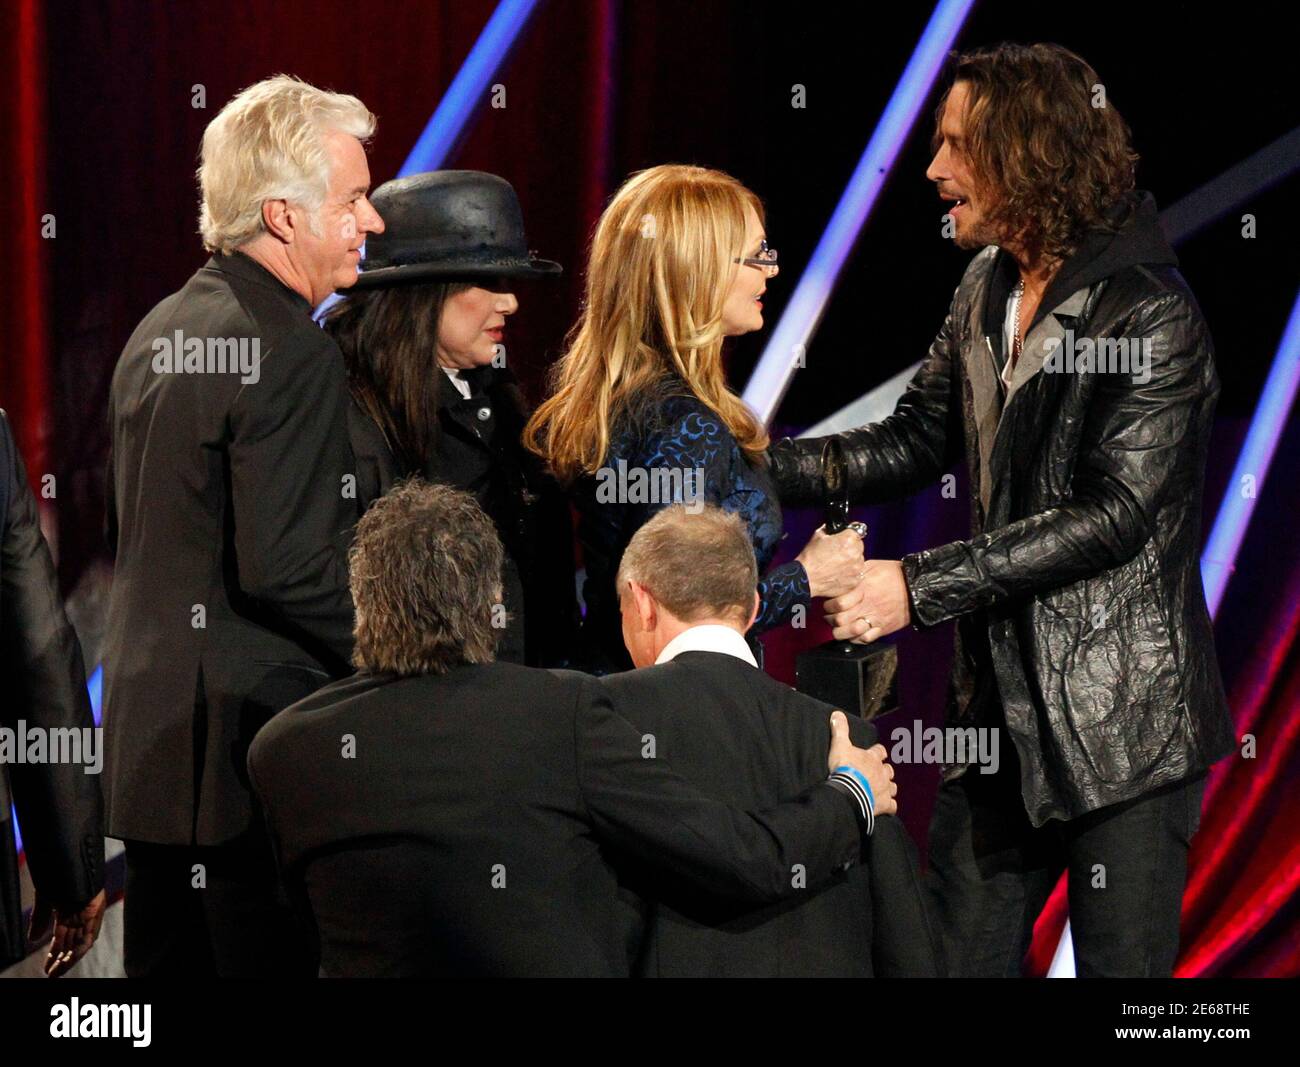 Ann and Nancy Wilson, of Heart, are greeeted by musician Chris Cornell  during their induction at the 2013 Rock and Roll Hall of Fame induction  ceremony in Los Angeles April 18, 2013.